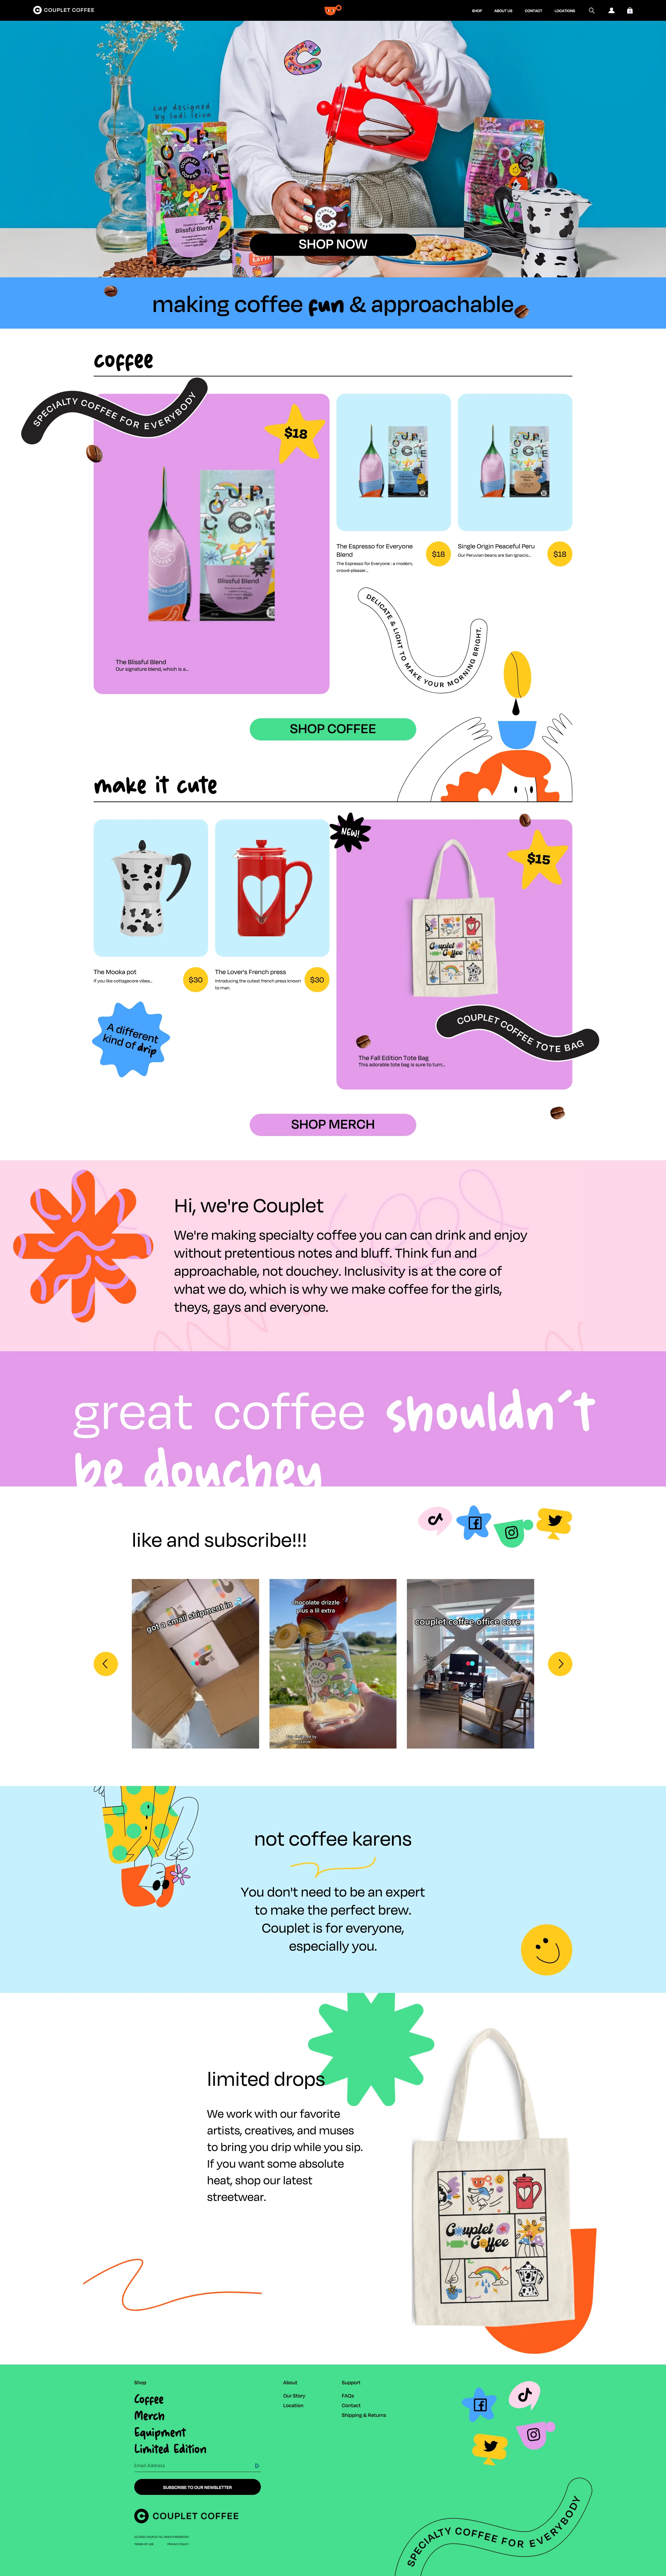 Couplet Coffee Landing Page Example: We are making great coffee more fun and approachable.